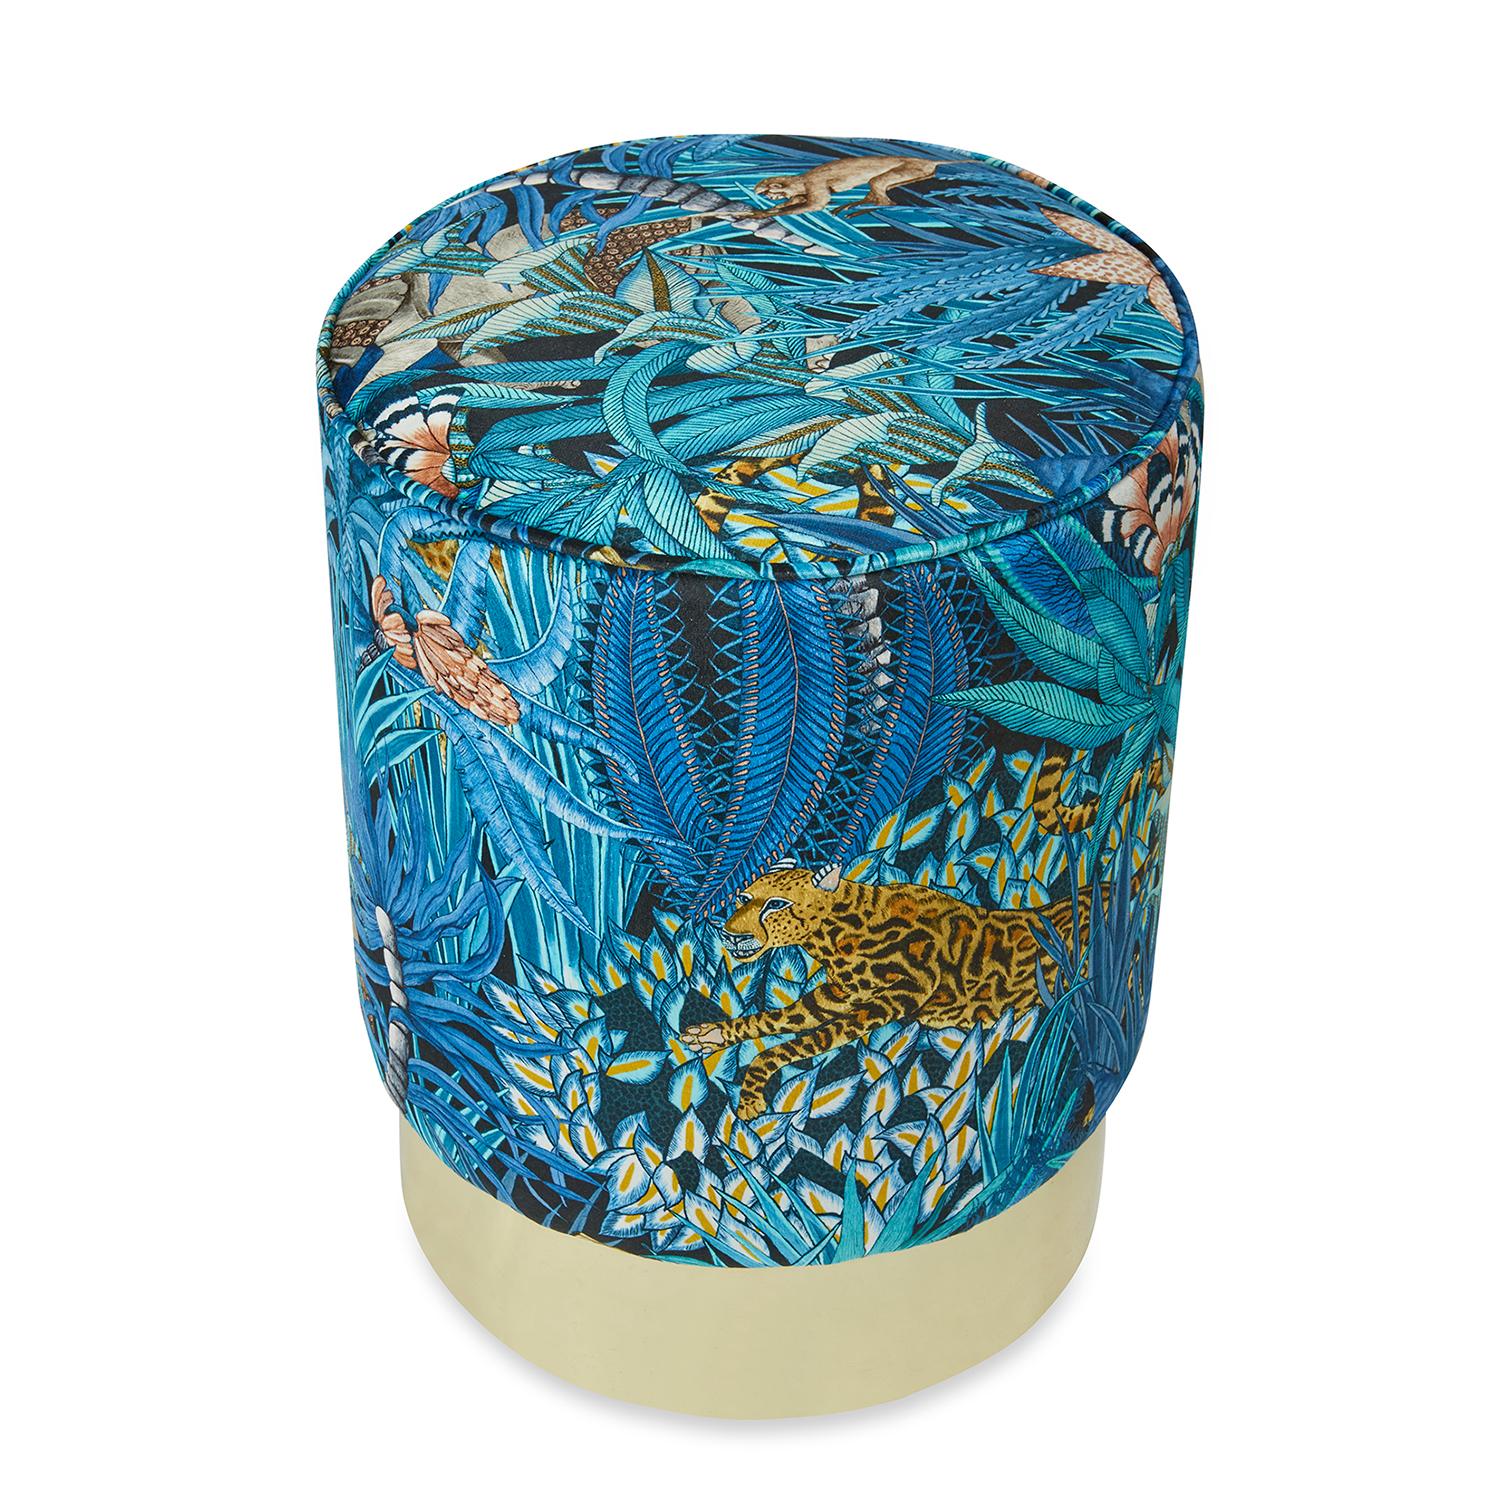 This ottoman's velvet upholstery, inspired by the fauna and flora of South Africa's Kruger National Park, sits atop a gleaming golden base. Ample high-density foam fill ensures long-lasting comfort whether you're using the pouf as a seat or a